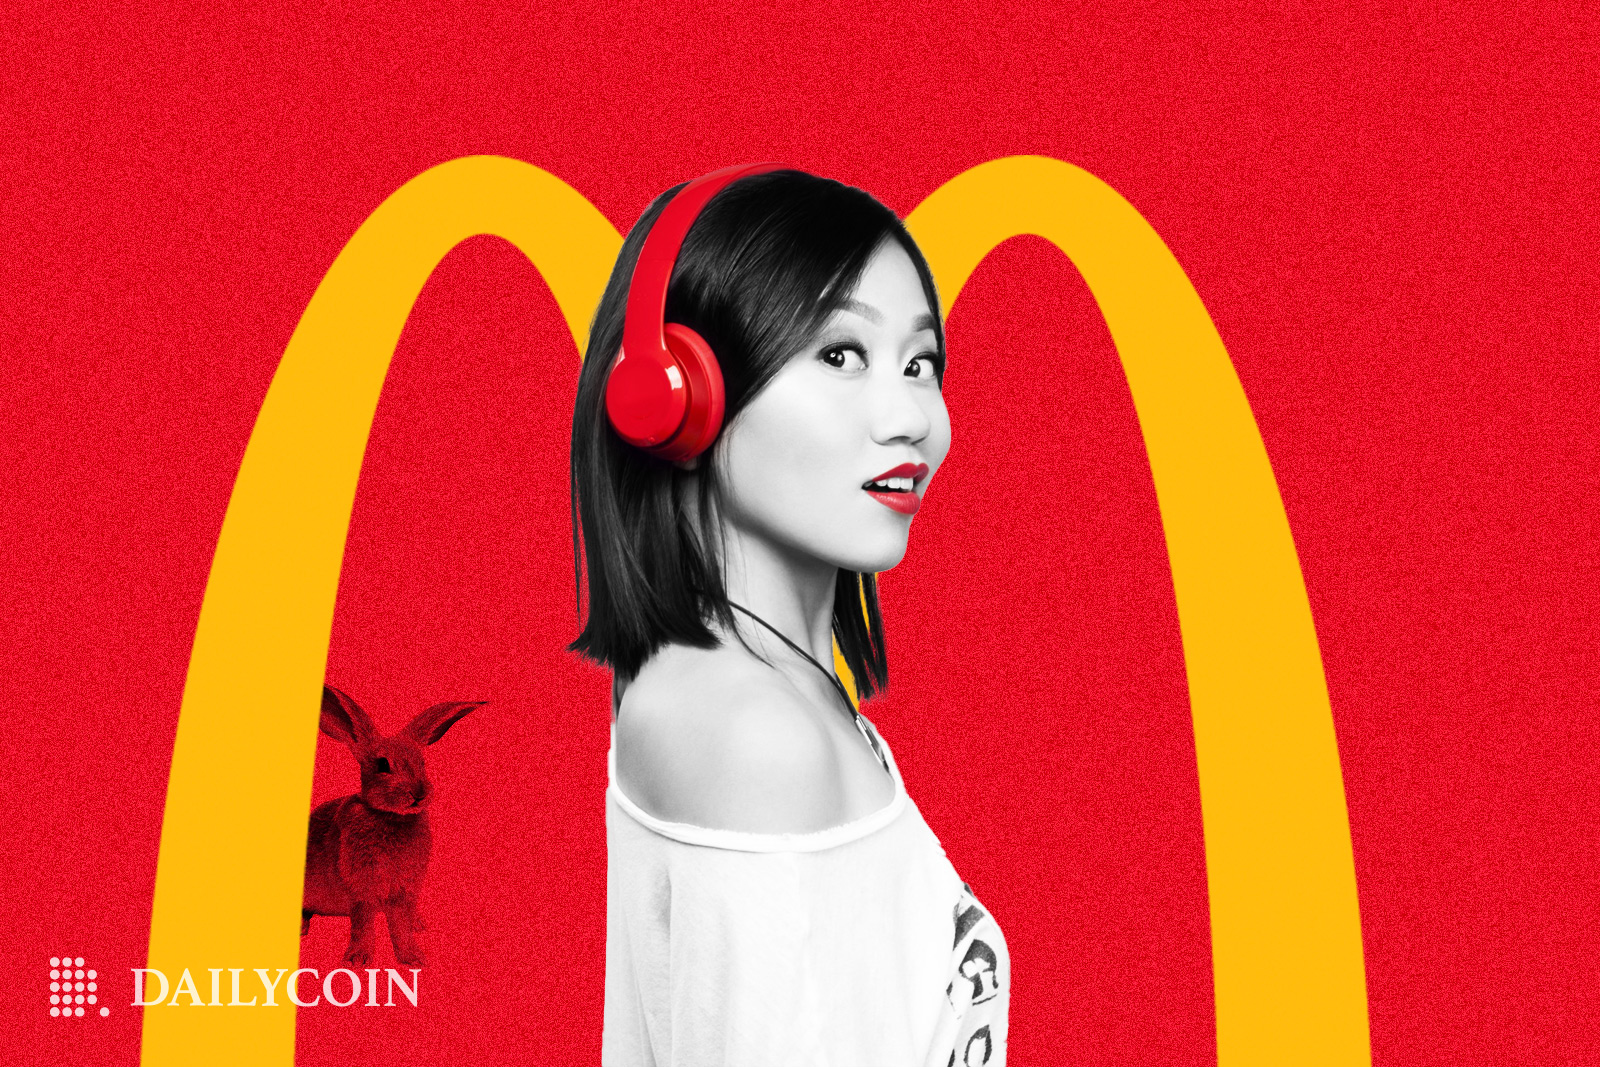 Karen X Cheng wearing red earphones in front of McDonald's logo and a rabbit symbolizing Lunar New Year.